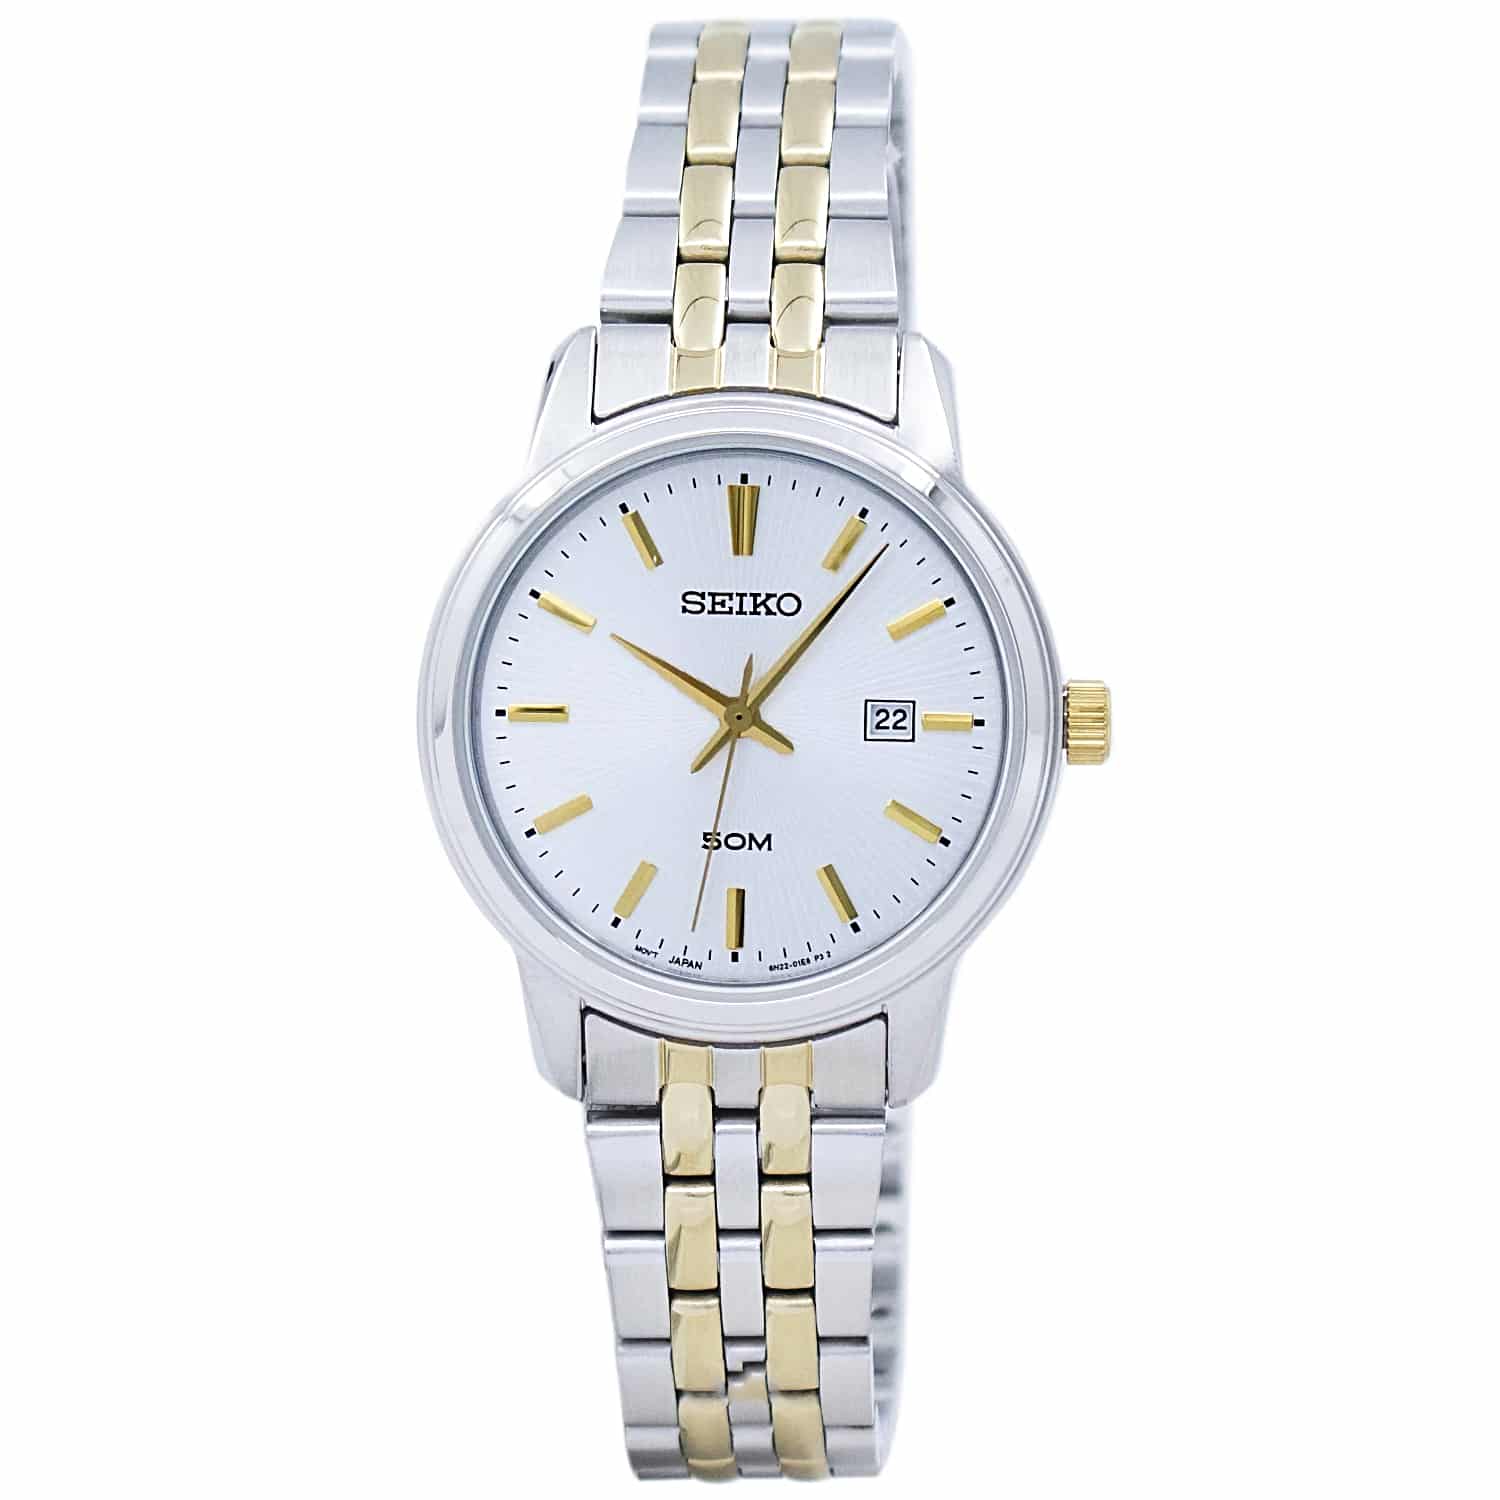 SUR661P1 SEIKO Ladies Dress Watch. SUR661P1 SEIKO Ladies Dress WatchLAYBUY - Pay it easy, in 6 weekly payments and have it now. Only pay the price of your purchase, when you pay your instalments on time. A late fee may be applied for missed payments. Crea